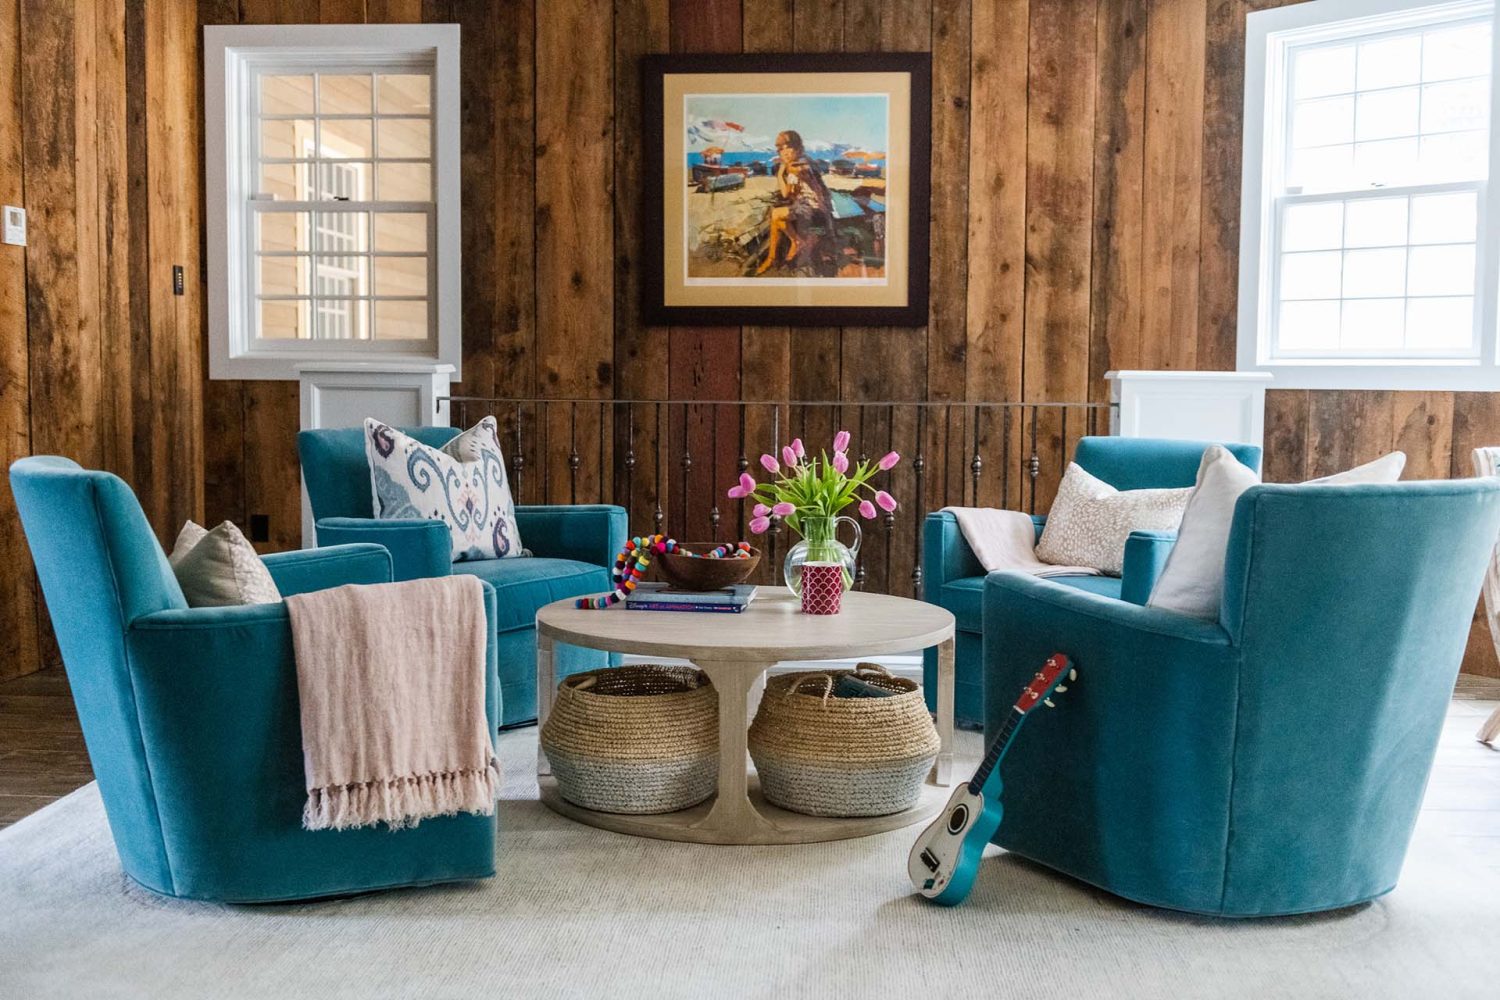 Wood-paneled family room with white-trimmed windows and light area rug. Four medium blue upholstered chairs are arranged around a round coffee table.